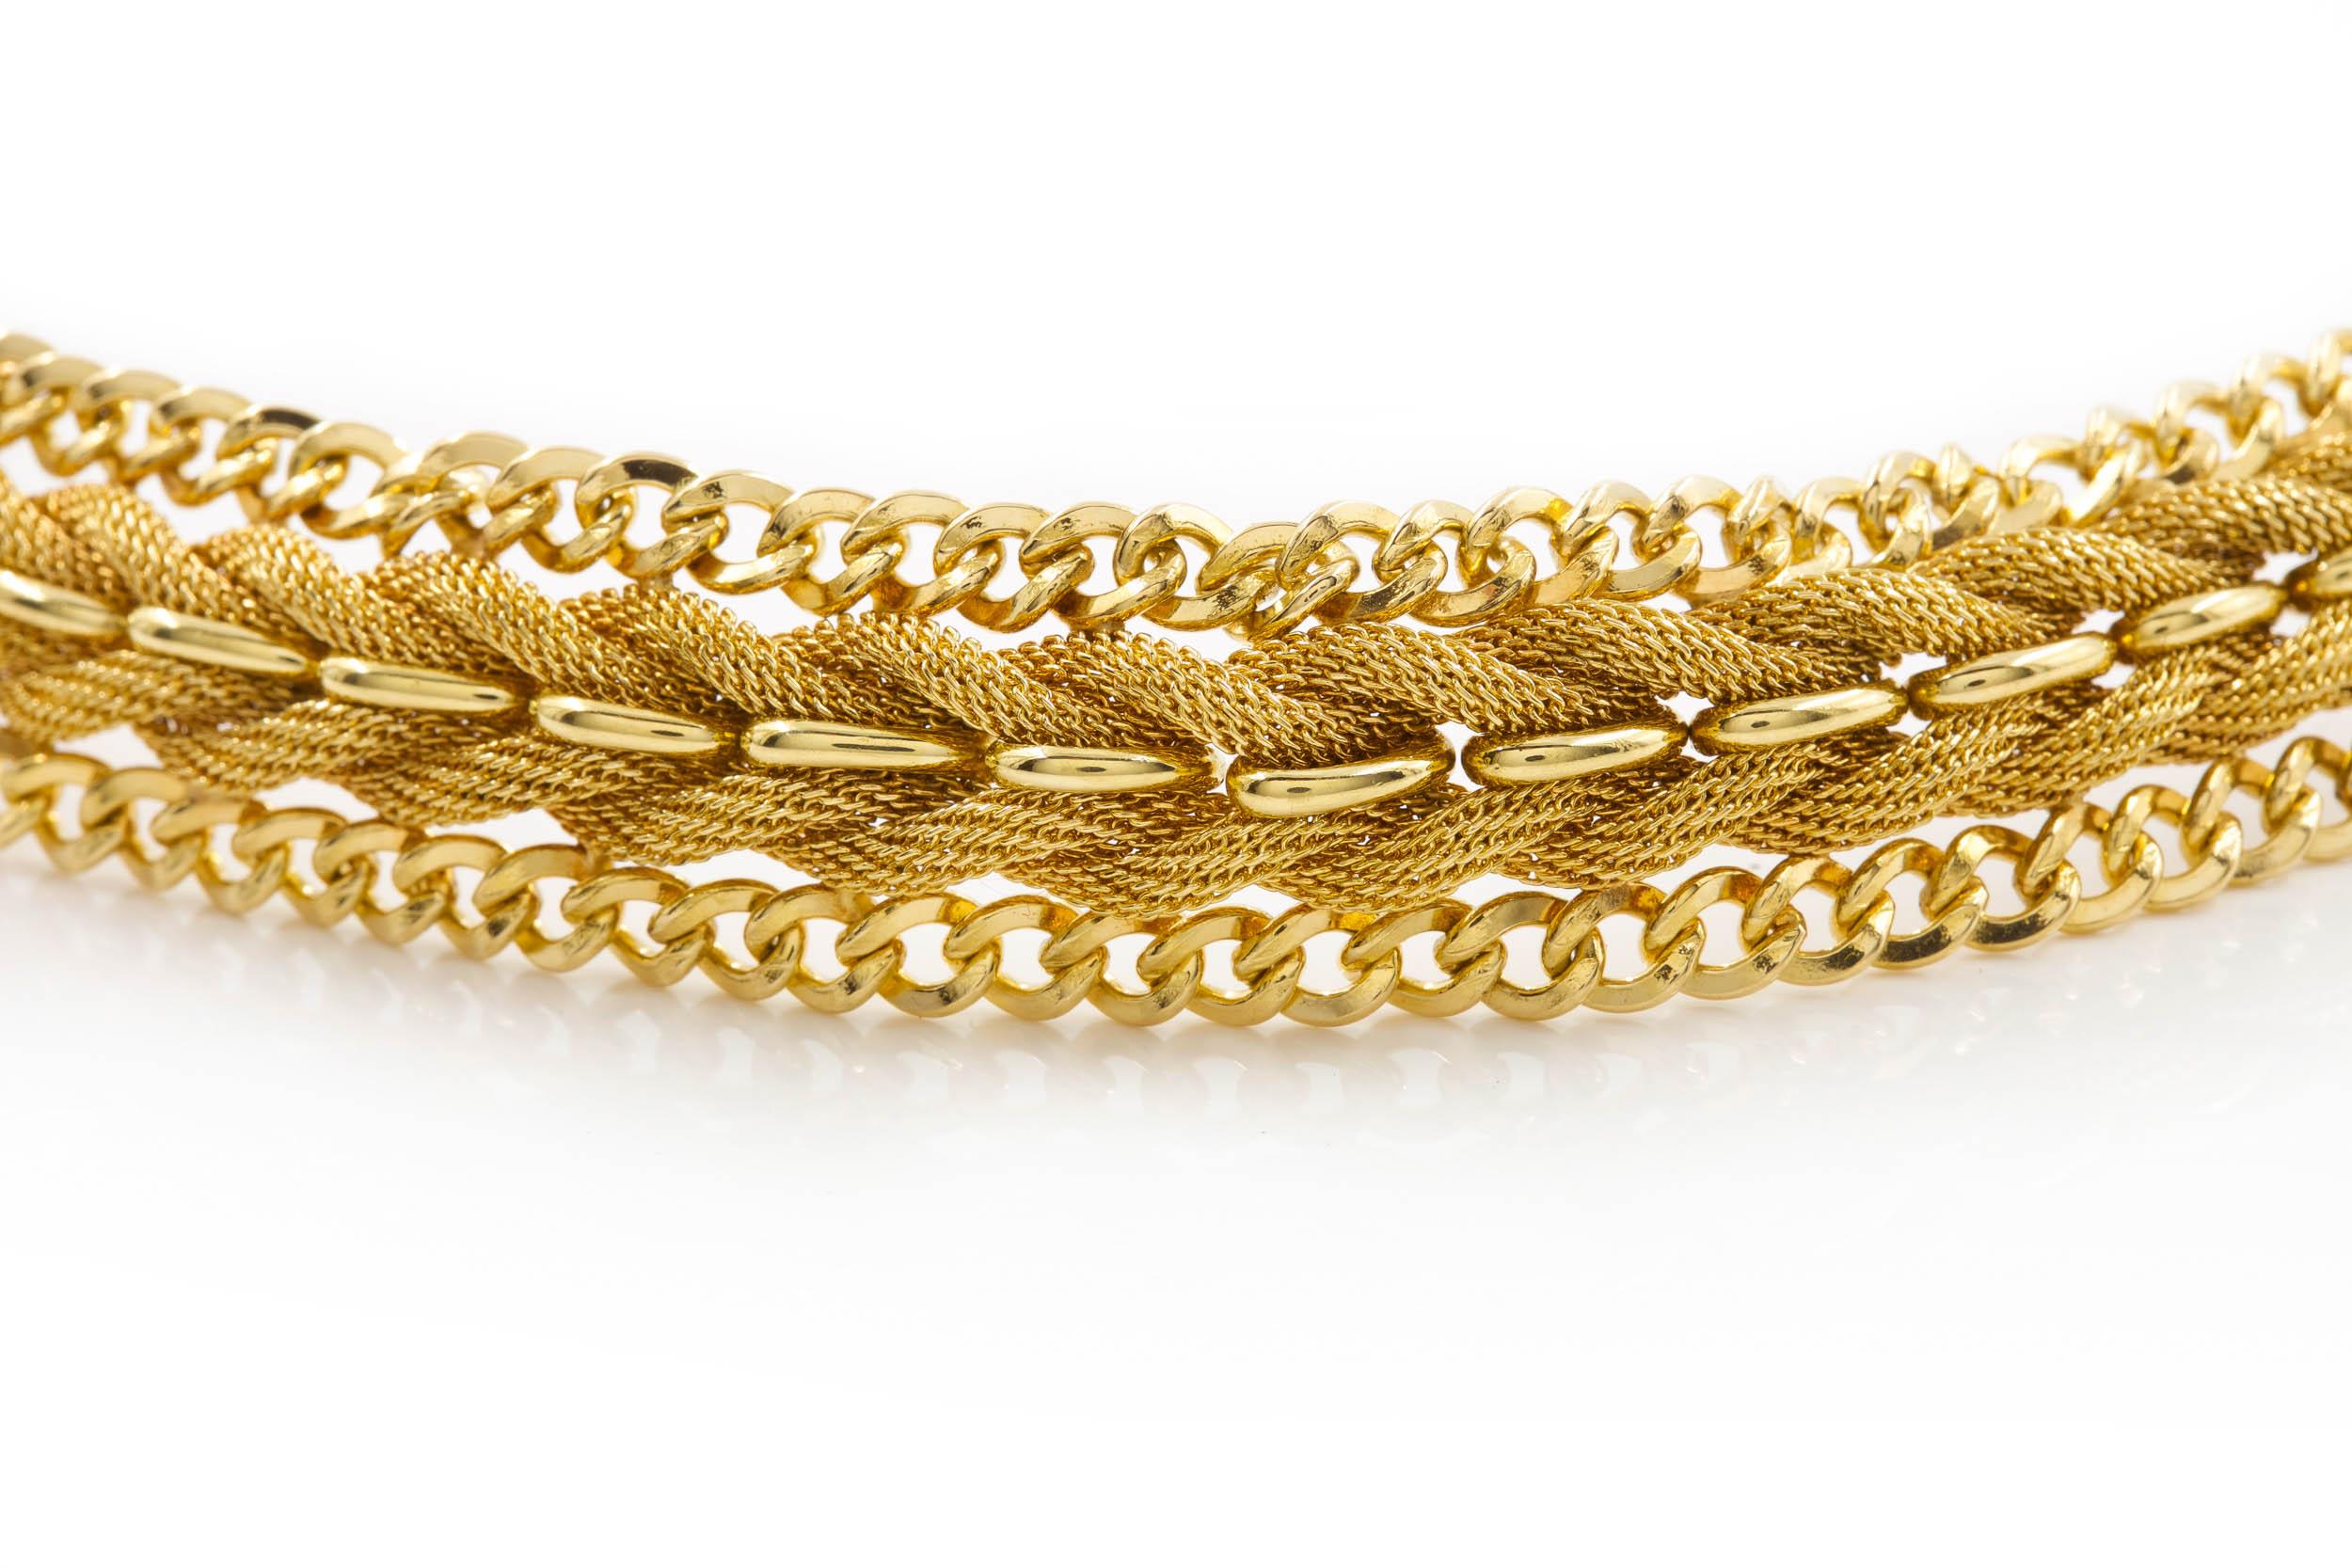 Modern Vintage 14k Gold Woven and Chain-Link Bracelet by AGC circa 1990  6 3/4